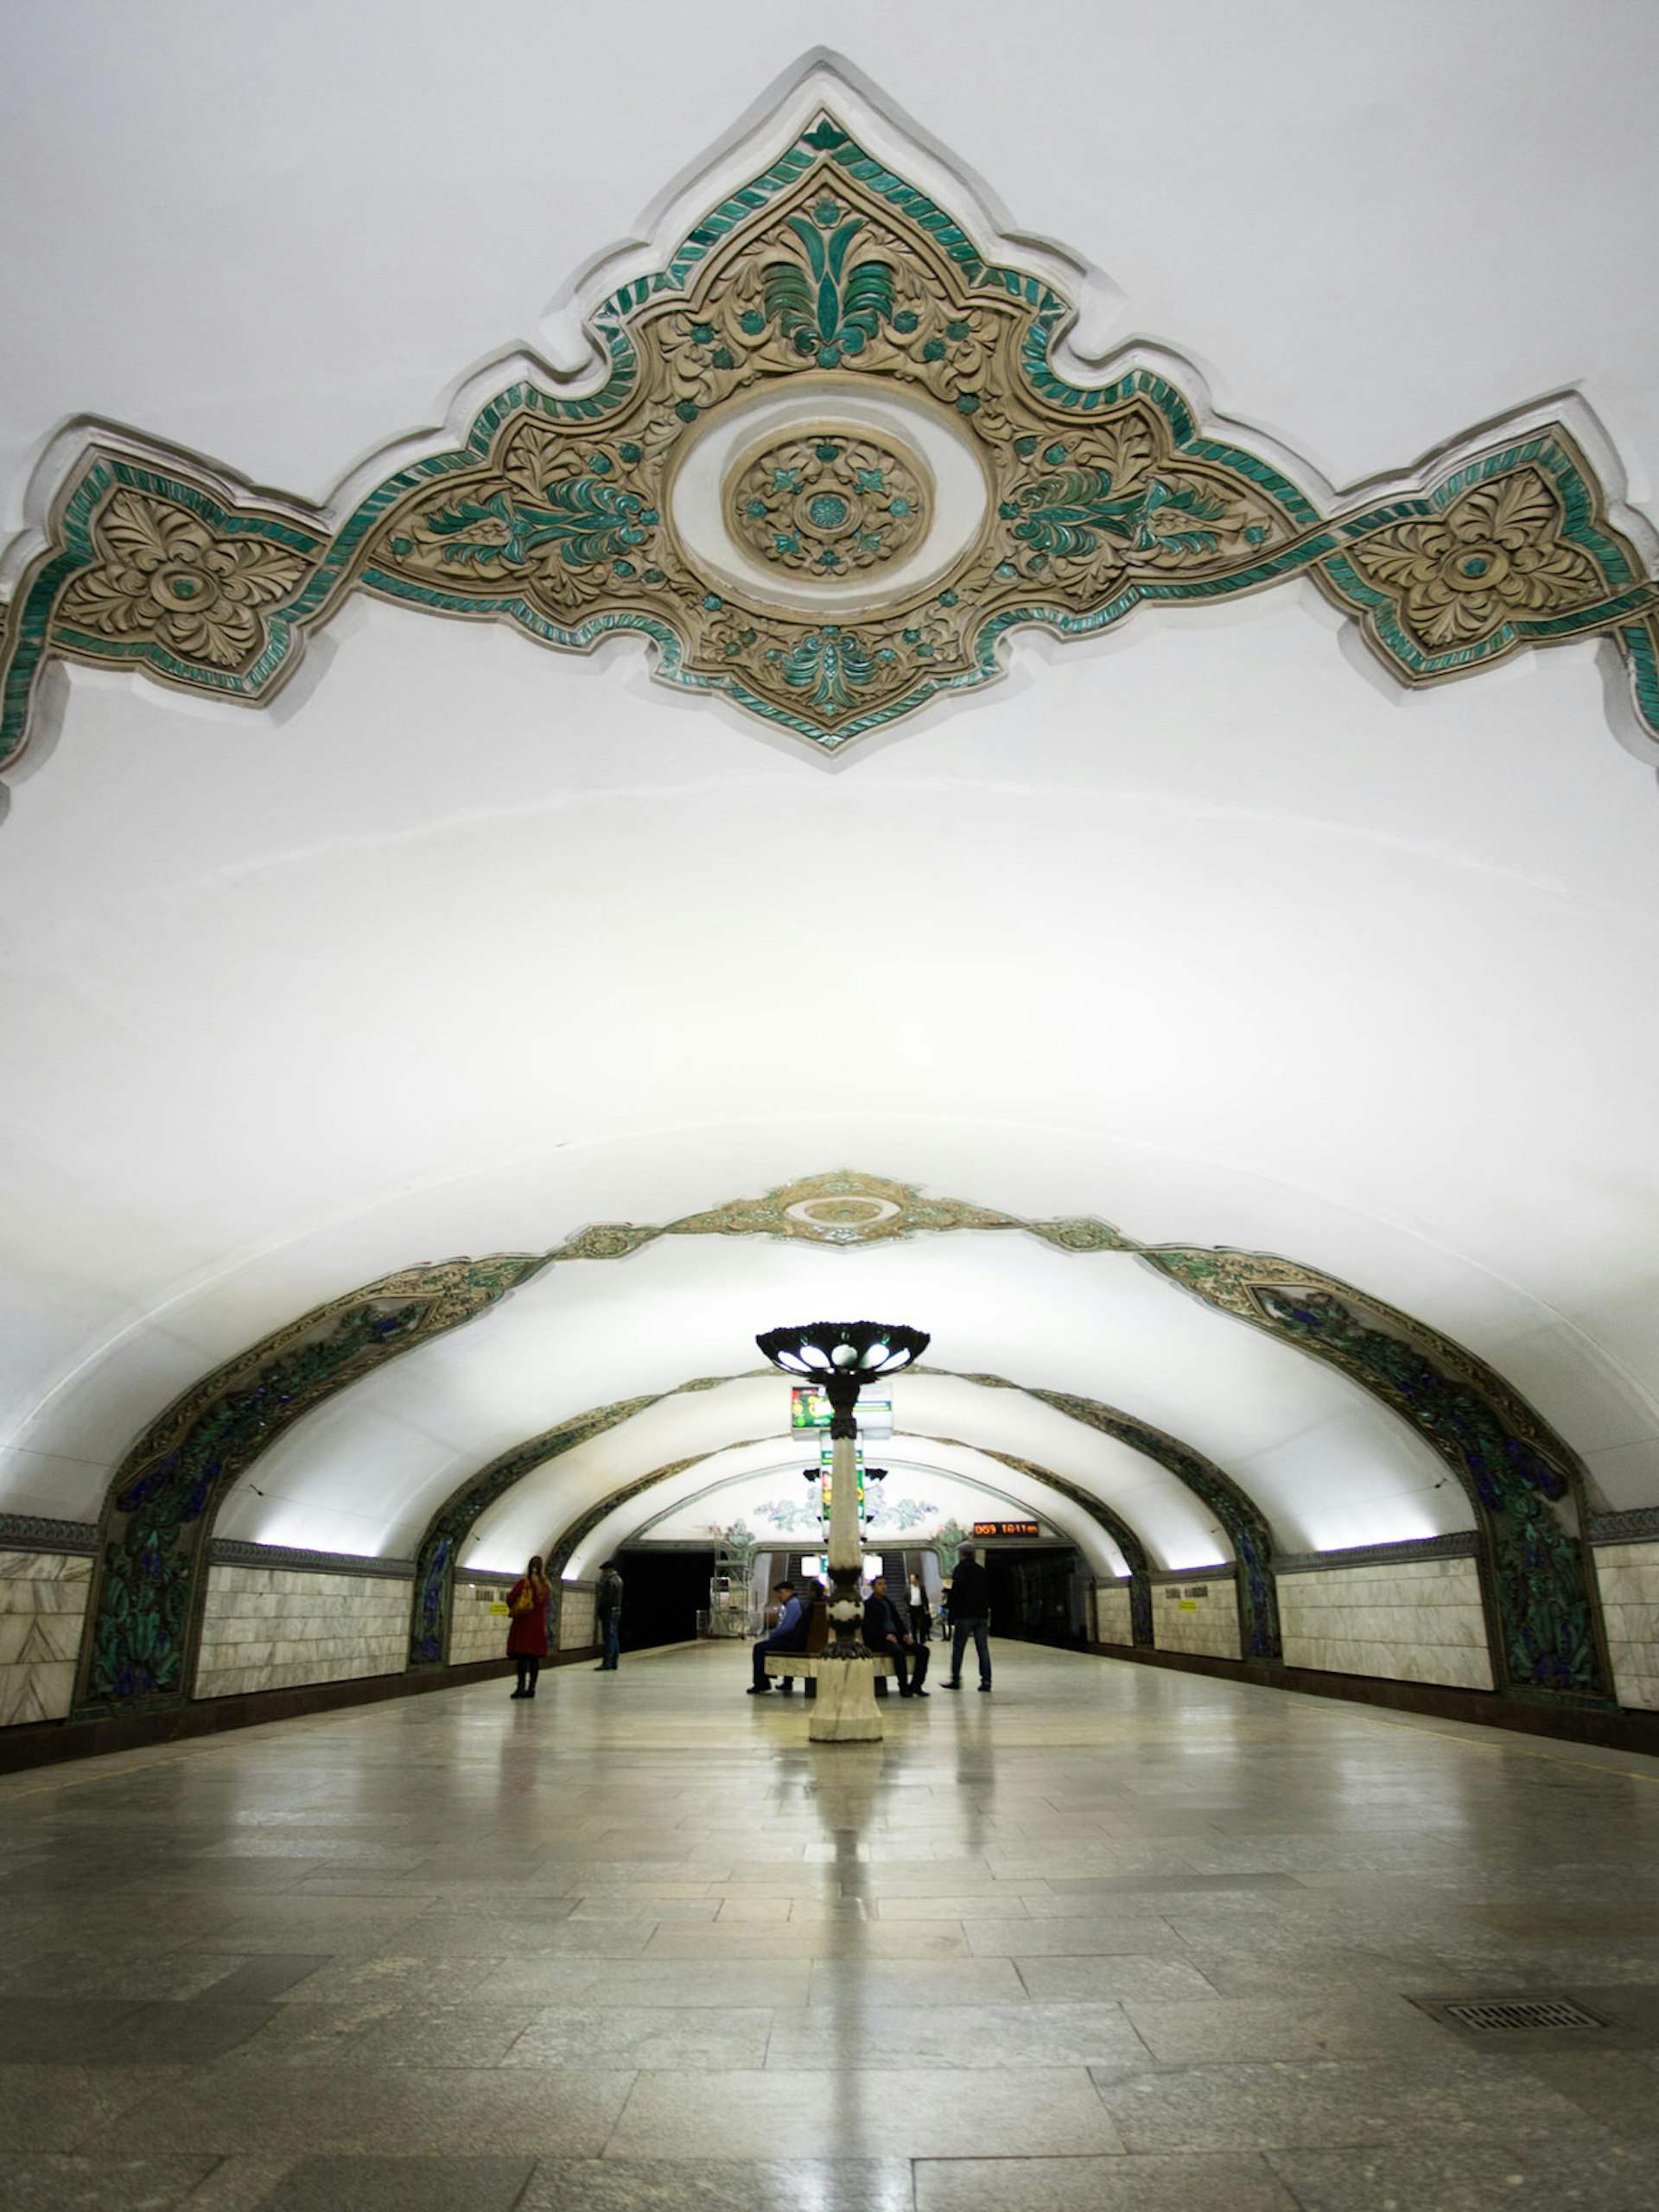 Khamid Olimjon station's mainly white domed ceiling decorated with geometric flourishes.